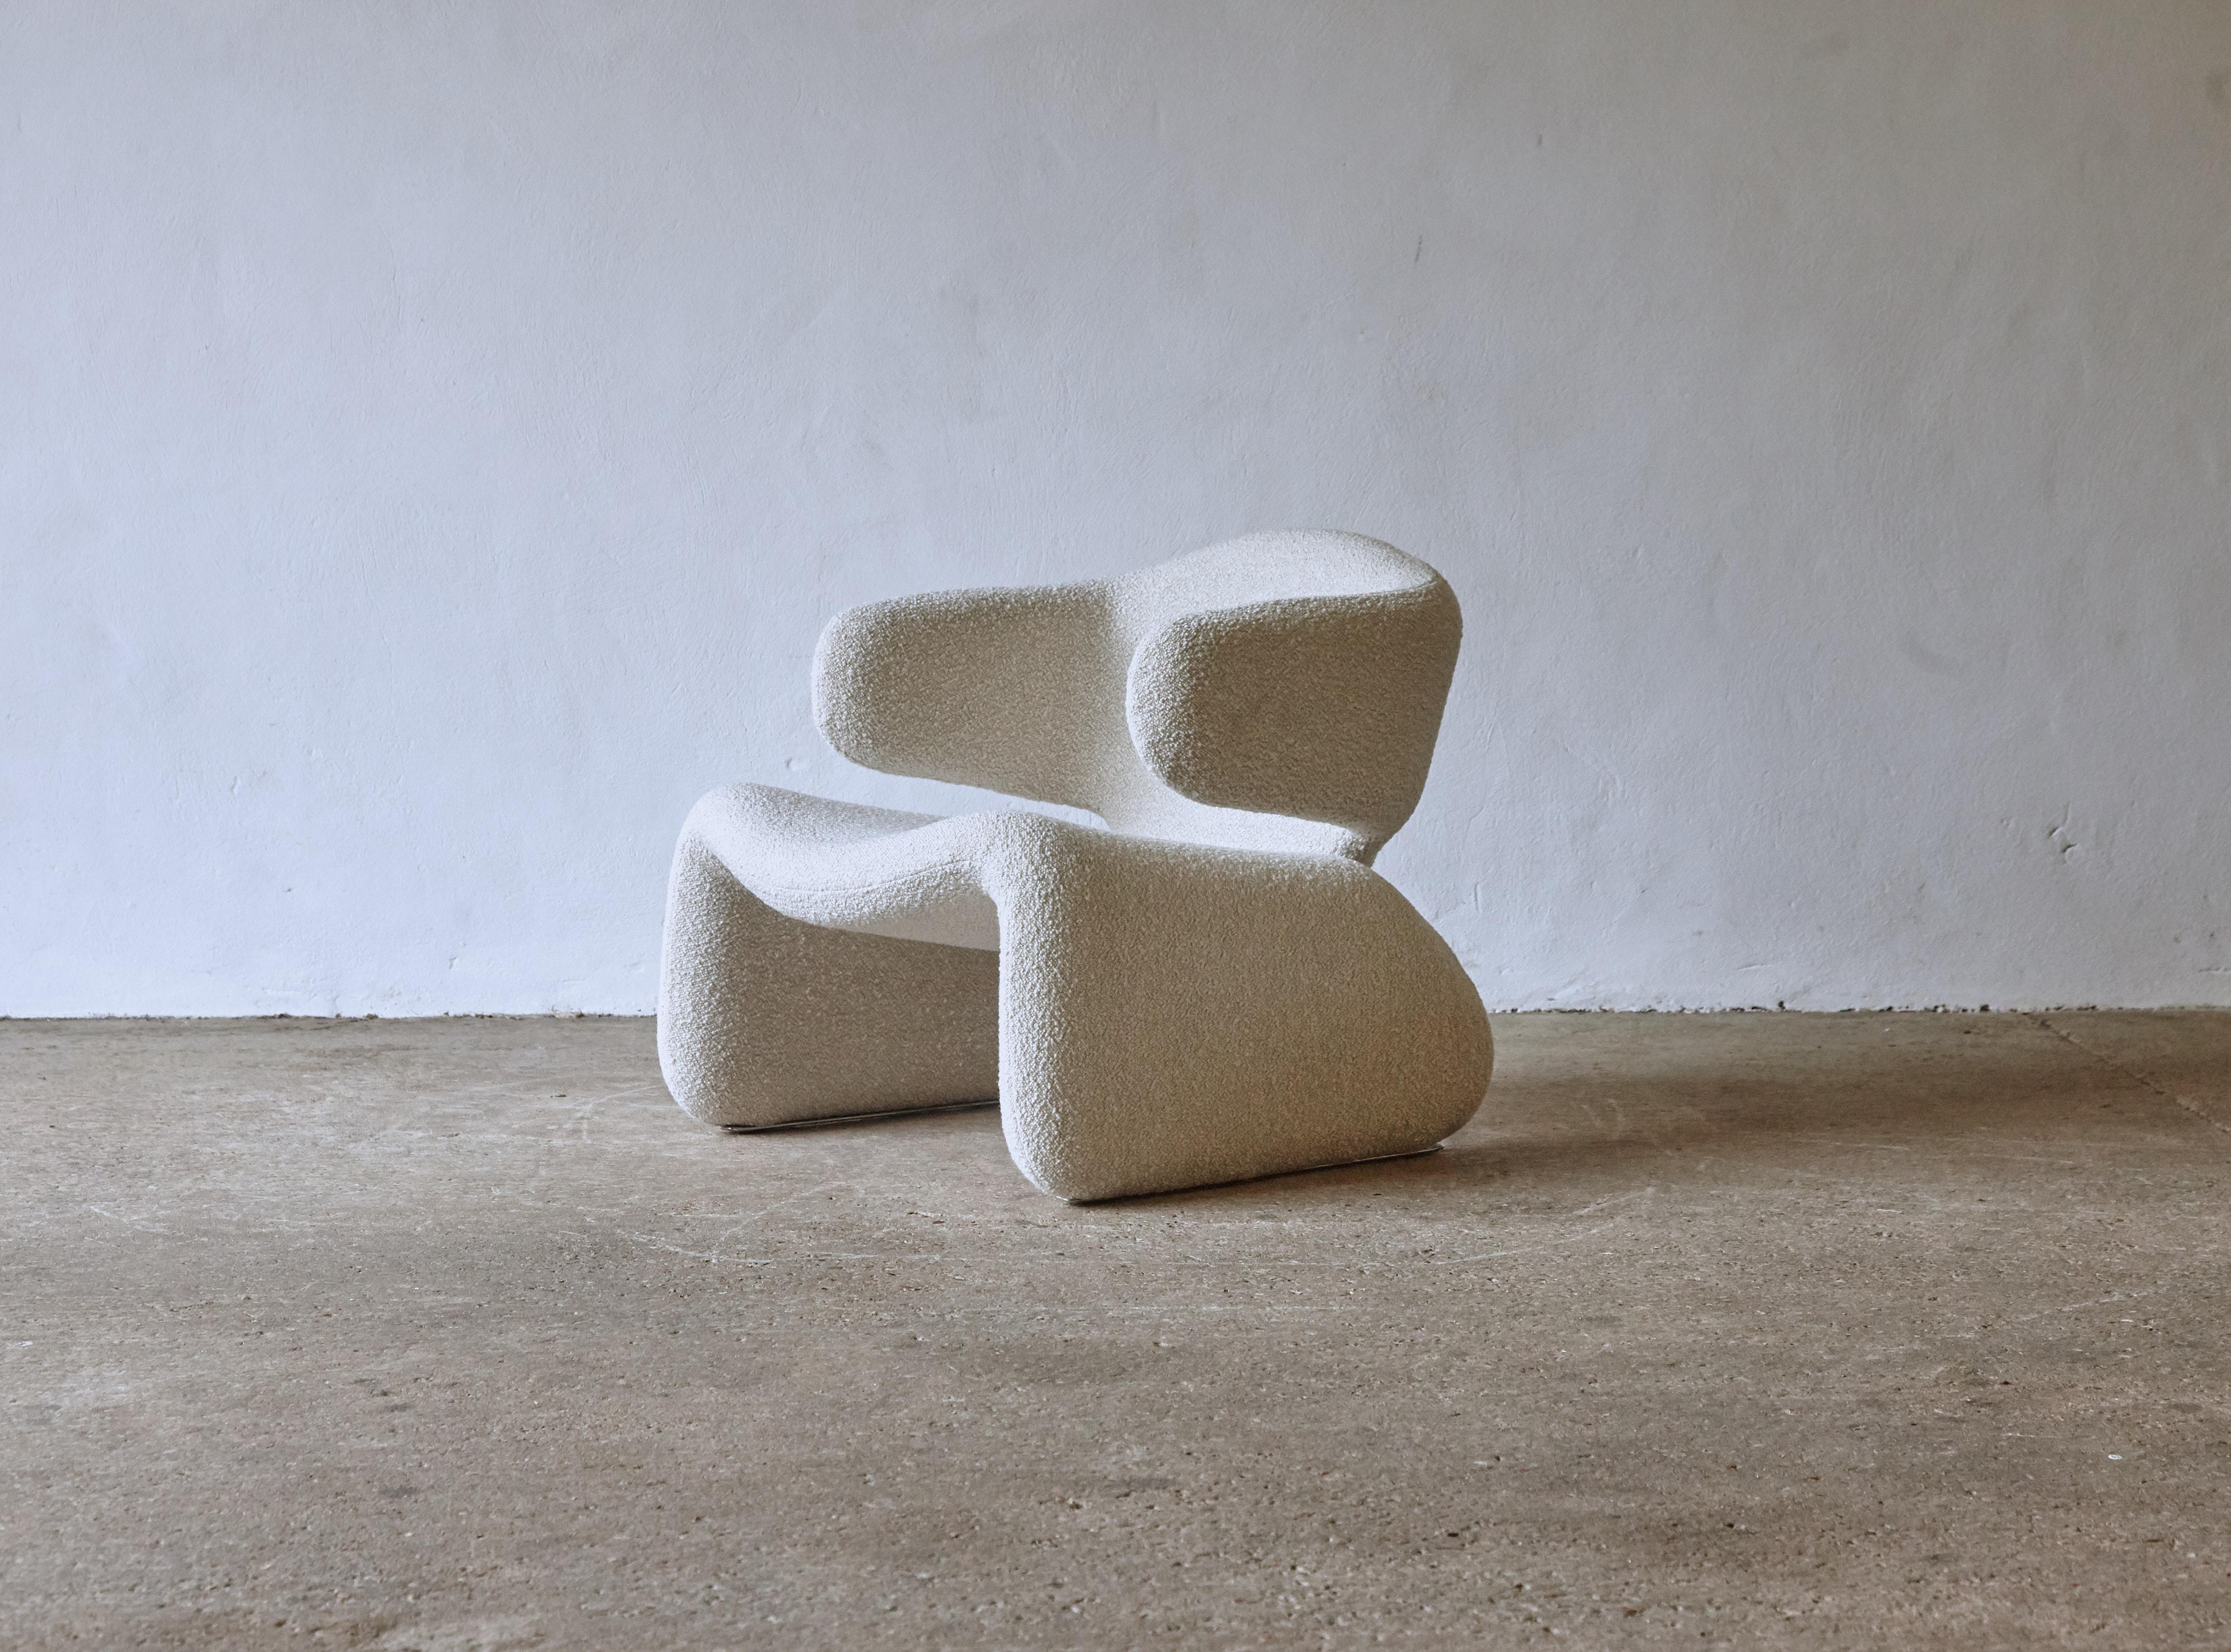 Rare Djinn chair by Olivier Mourgue, France, manufactured by Airborne International, circa 1965. Early edition newly upholstered in high quality wool Lelievre Lama Naturel boucle. A superb piece, ready to use. This model was famously used in Stanley